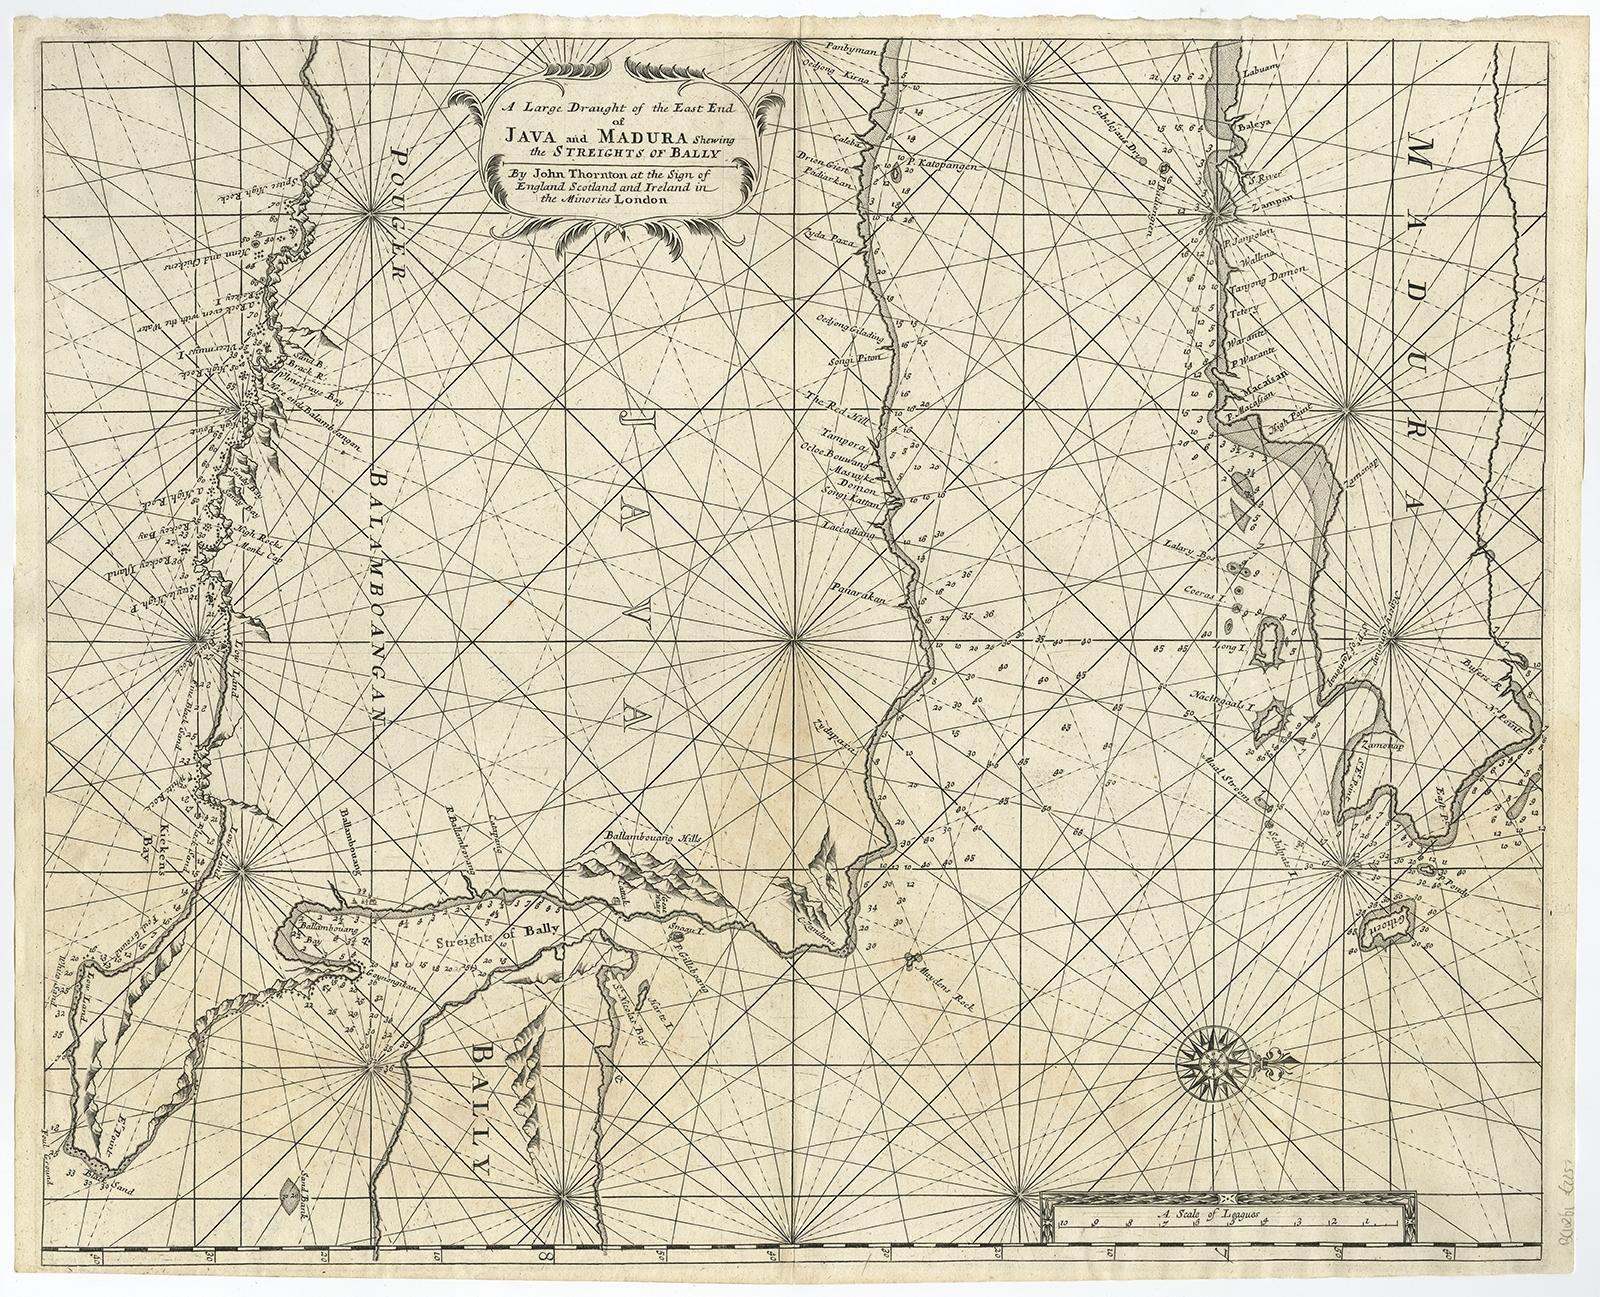 Antique map titled 'A Large Draught of the East End of Java and Madura shewing the Streights of Bally.' 

Rare early example of this working English Sea Chart of part of Indonesia with Java, Madura, and the Straights of Bali, Indonesia. Source